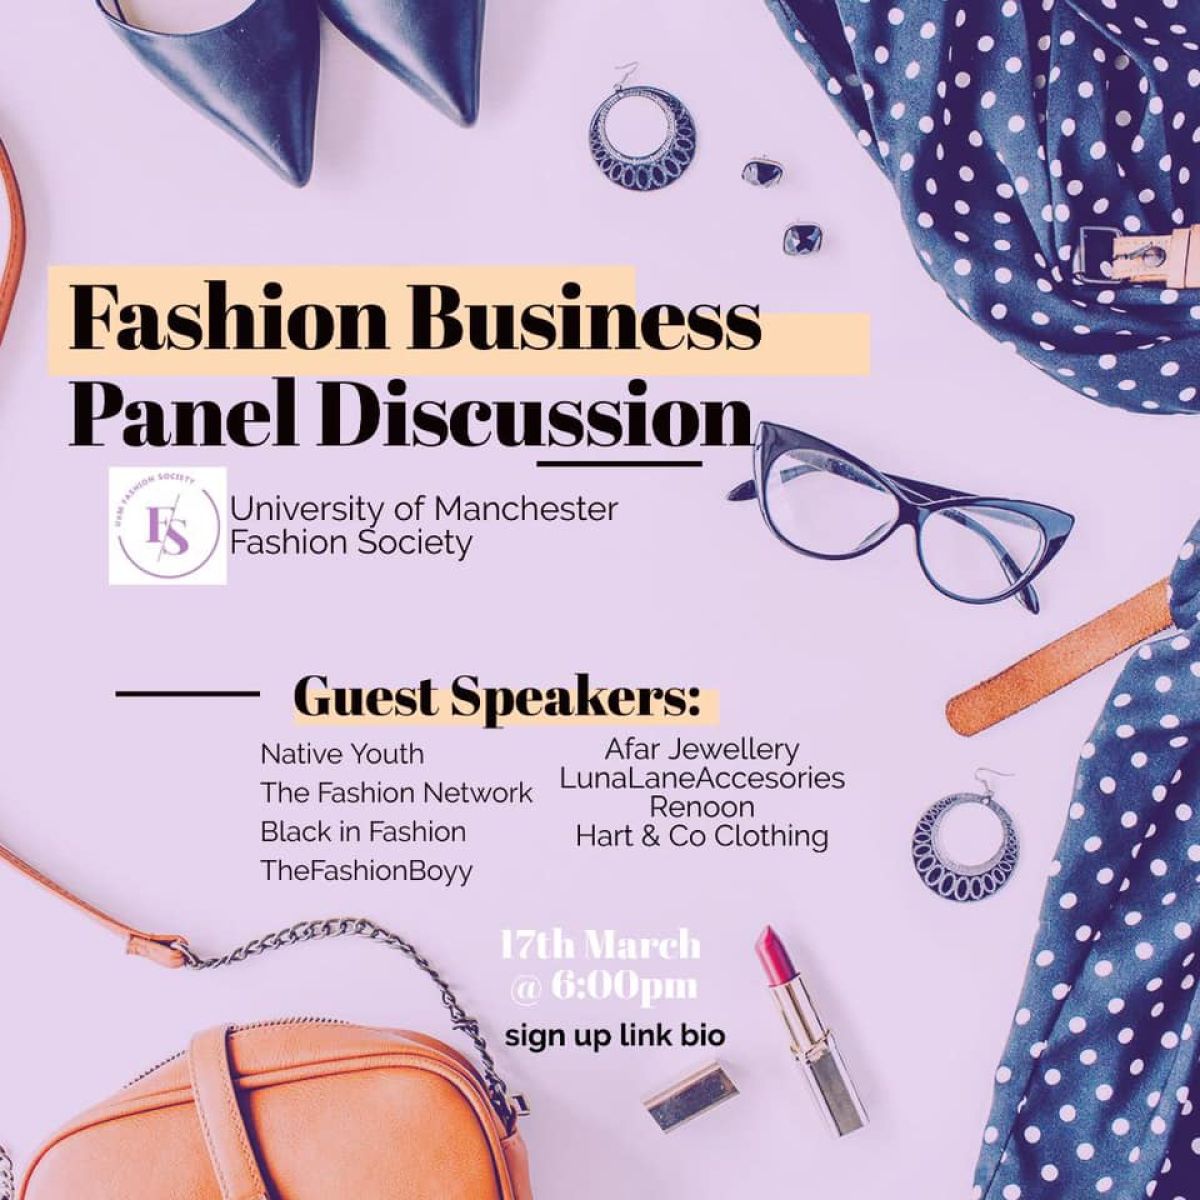 Join Fashion Soc’s Fashion Business Panel Discussion